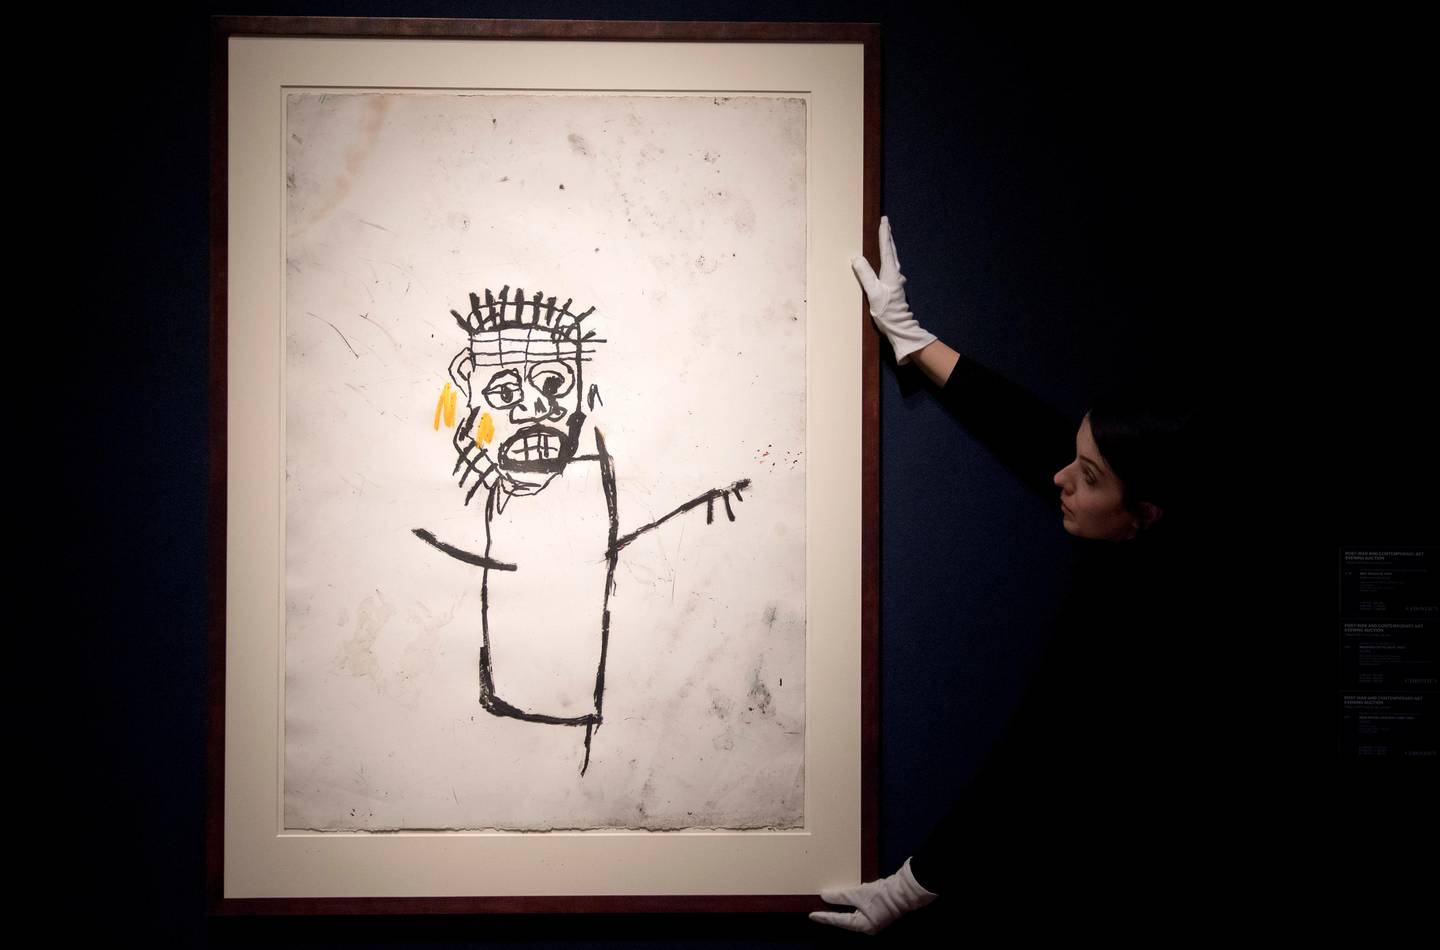 An employee poses with an artwork by American artist Jean-Michel Basquiat entitled "Untitled", with an estimated value of 1-1.5 million GBP (1.2-1.7 million EUR: 1.2-1.8 million USD) during a photocall ahead of the Post-War and Contemporary art sale at Christie's in London on March 3, 2017.